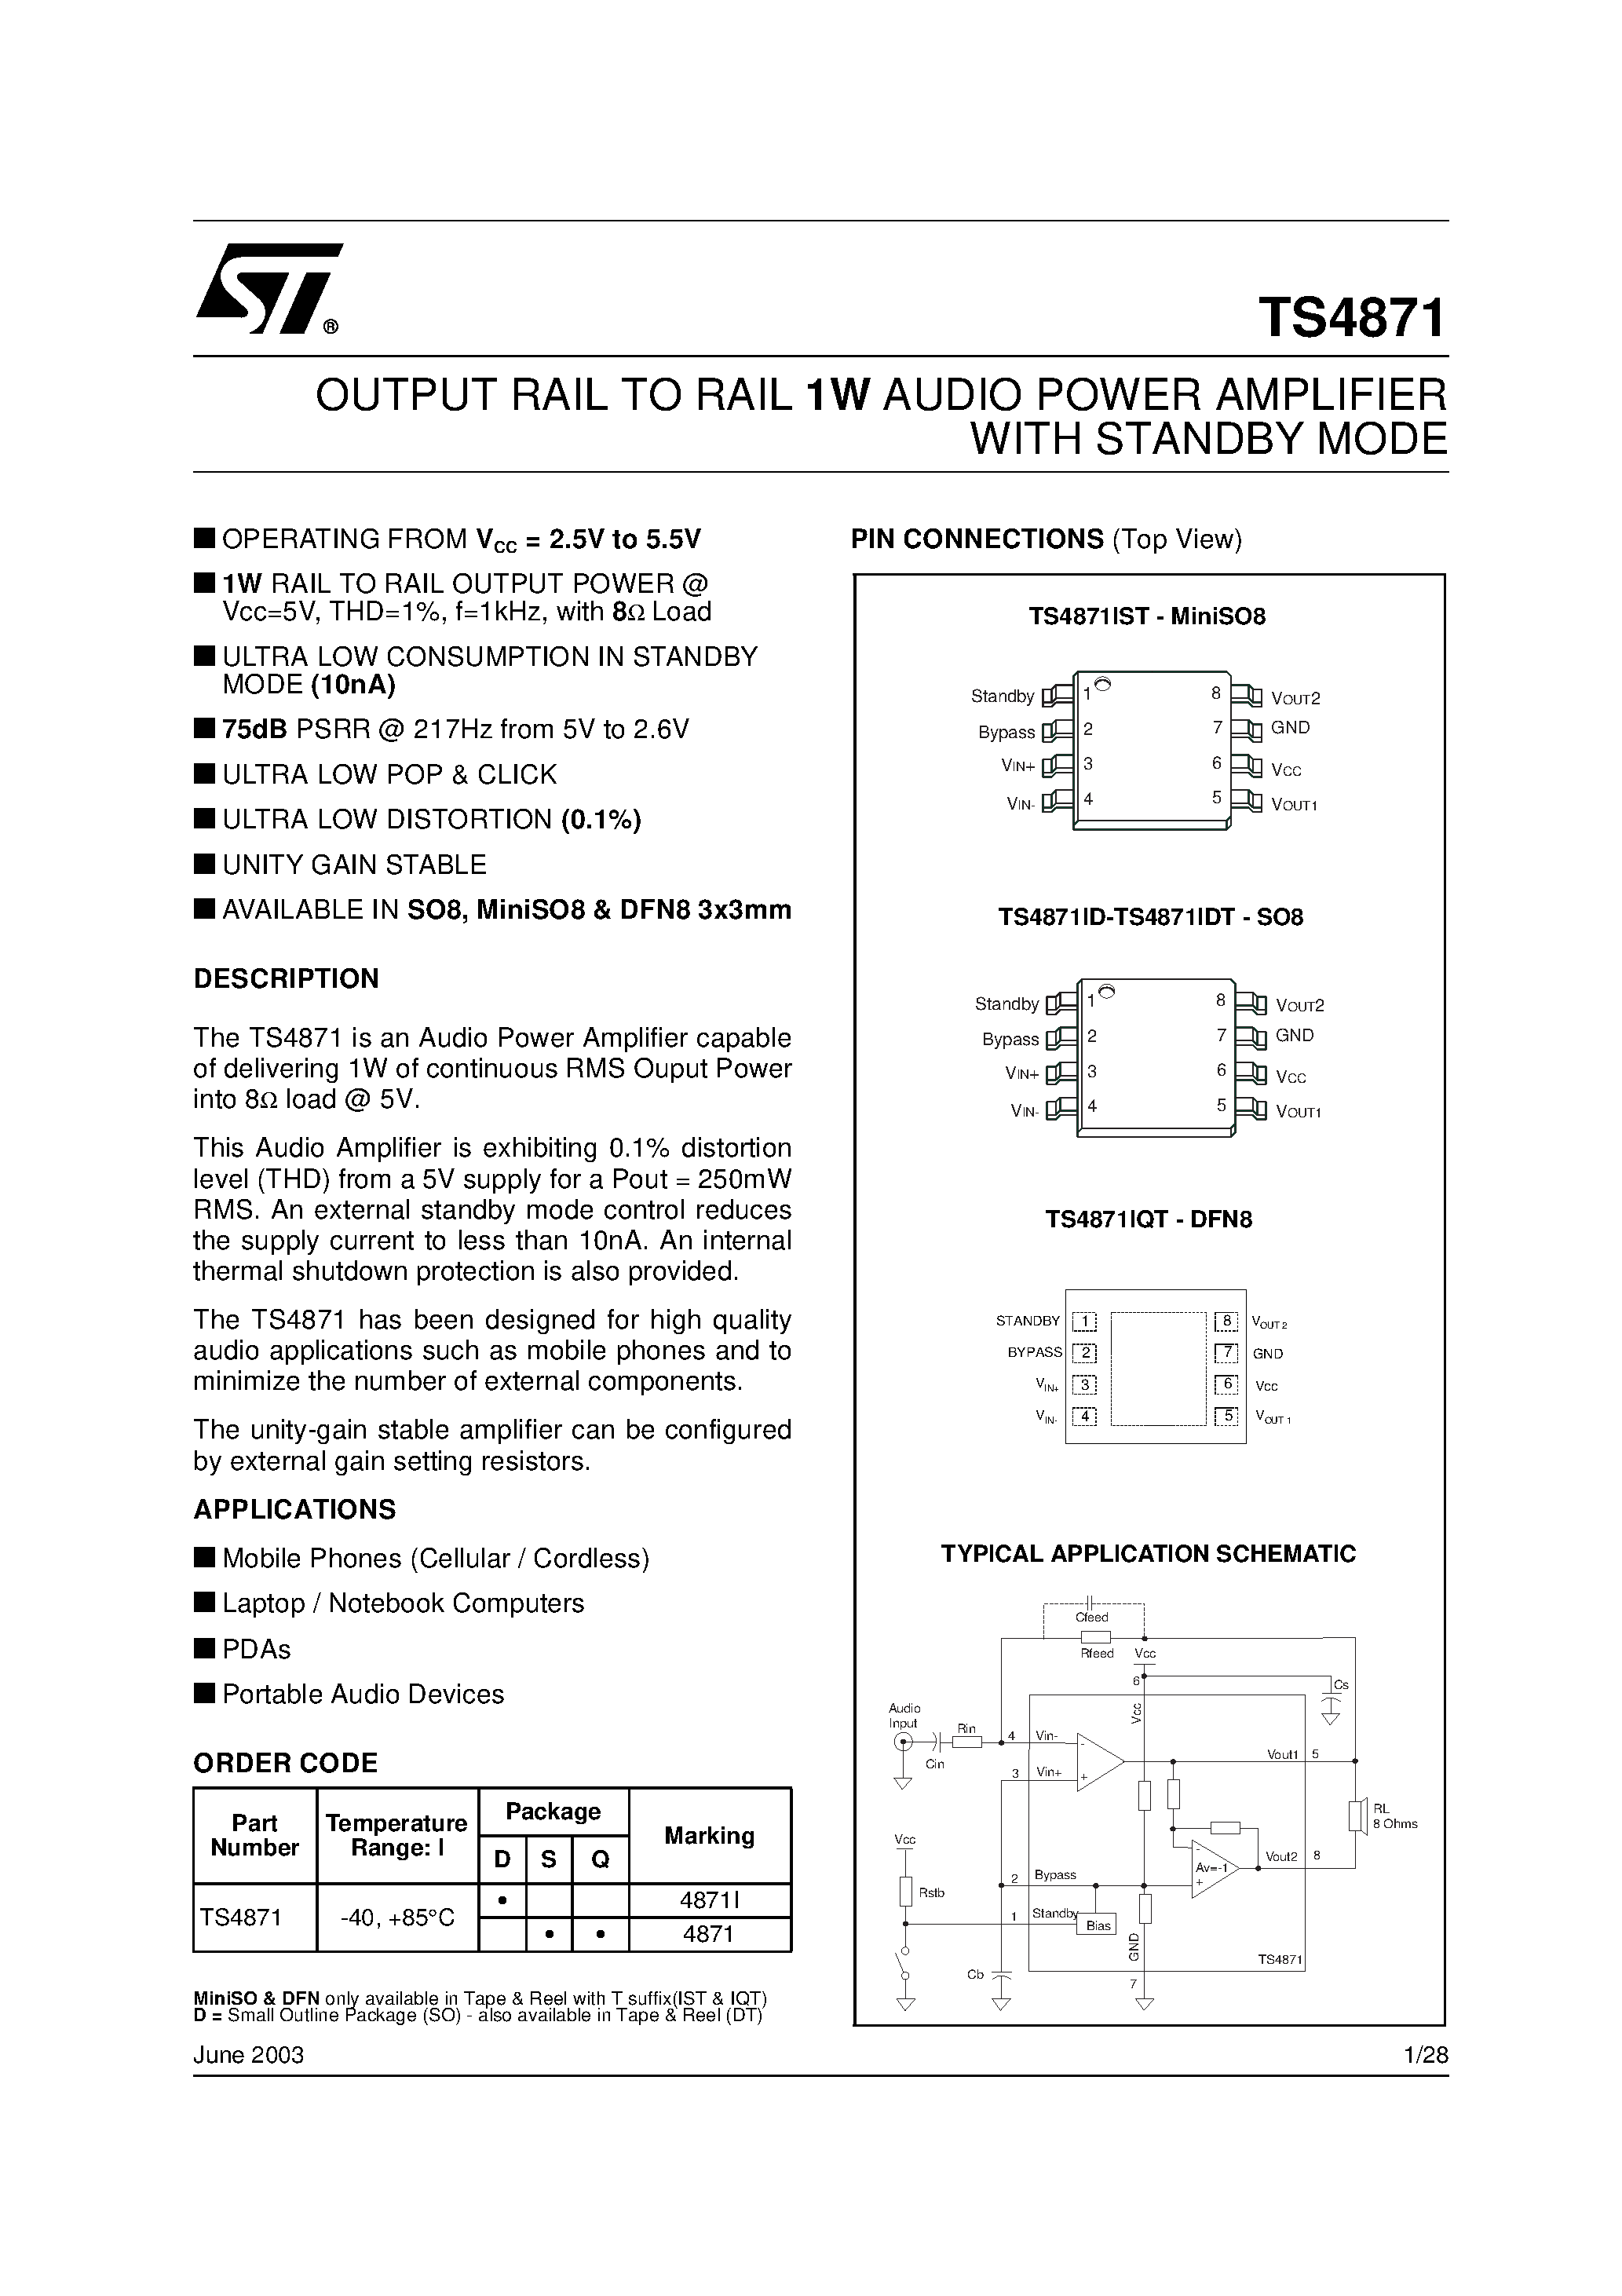 Datasheet TS4871 - OUTPUT RAIL TO RAIL 1W AUDIO POWER AMPLIFIER WITH STANDBY MODE page 1